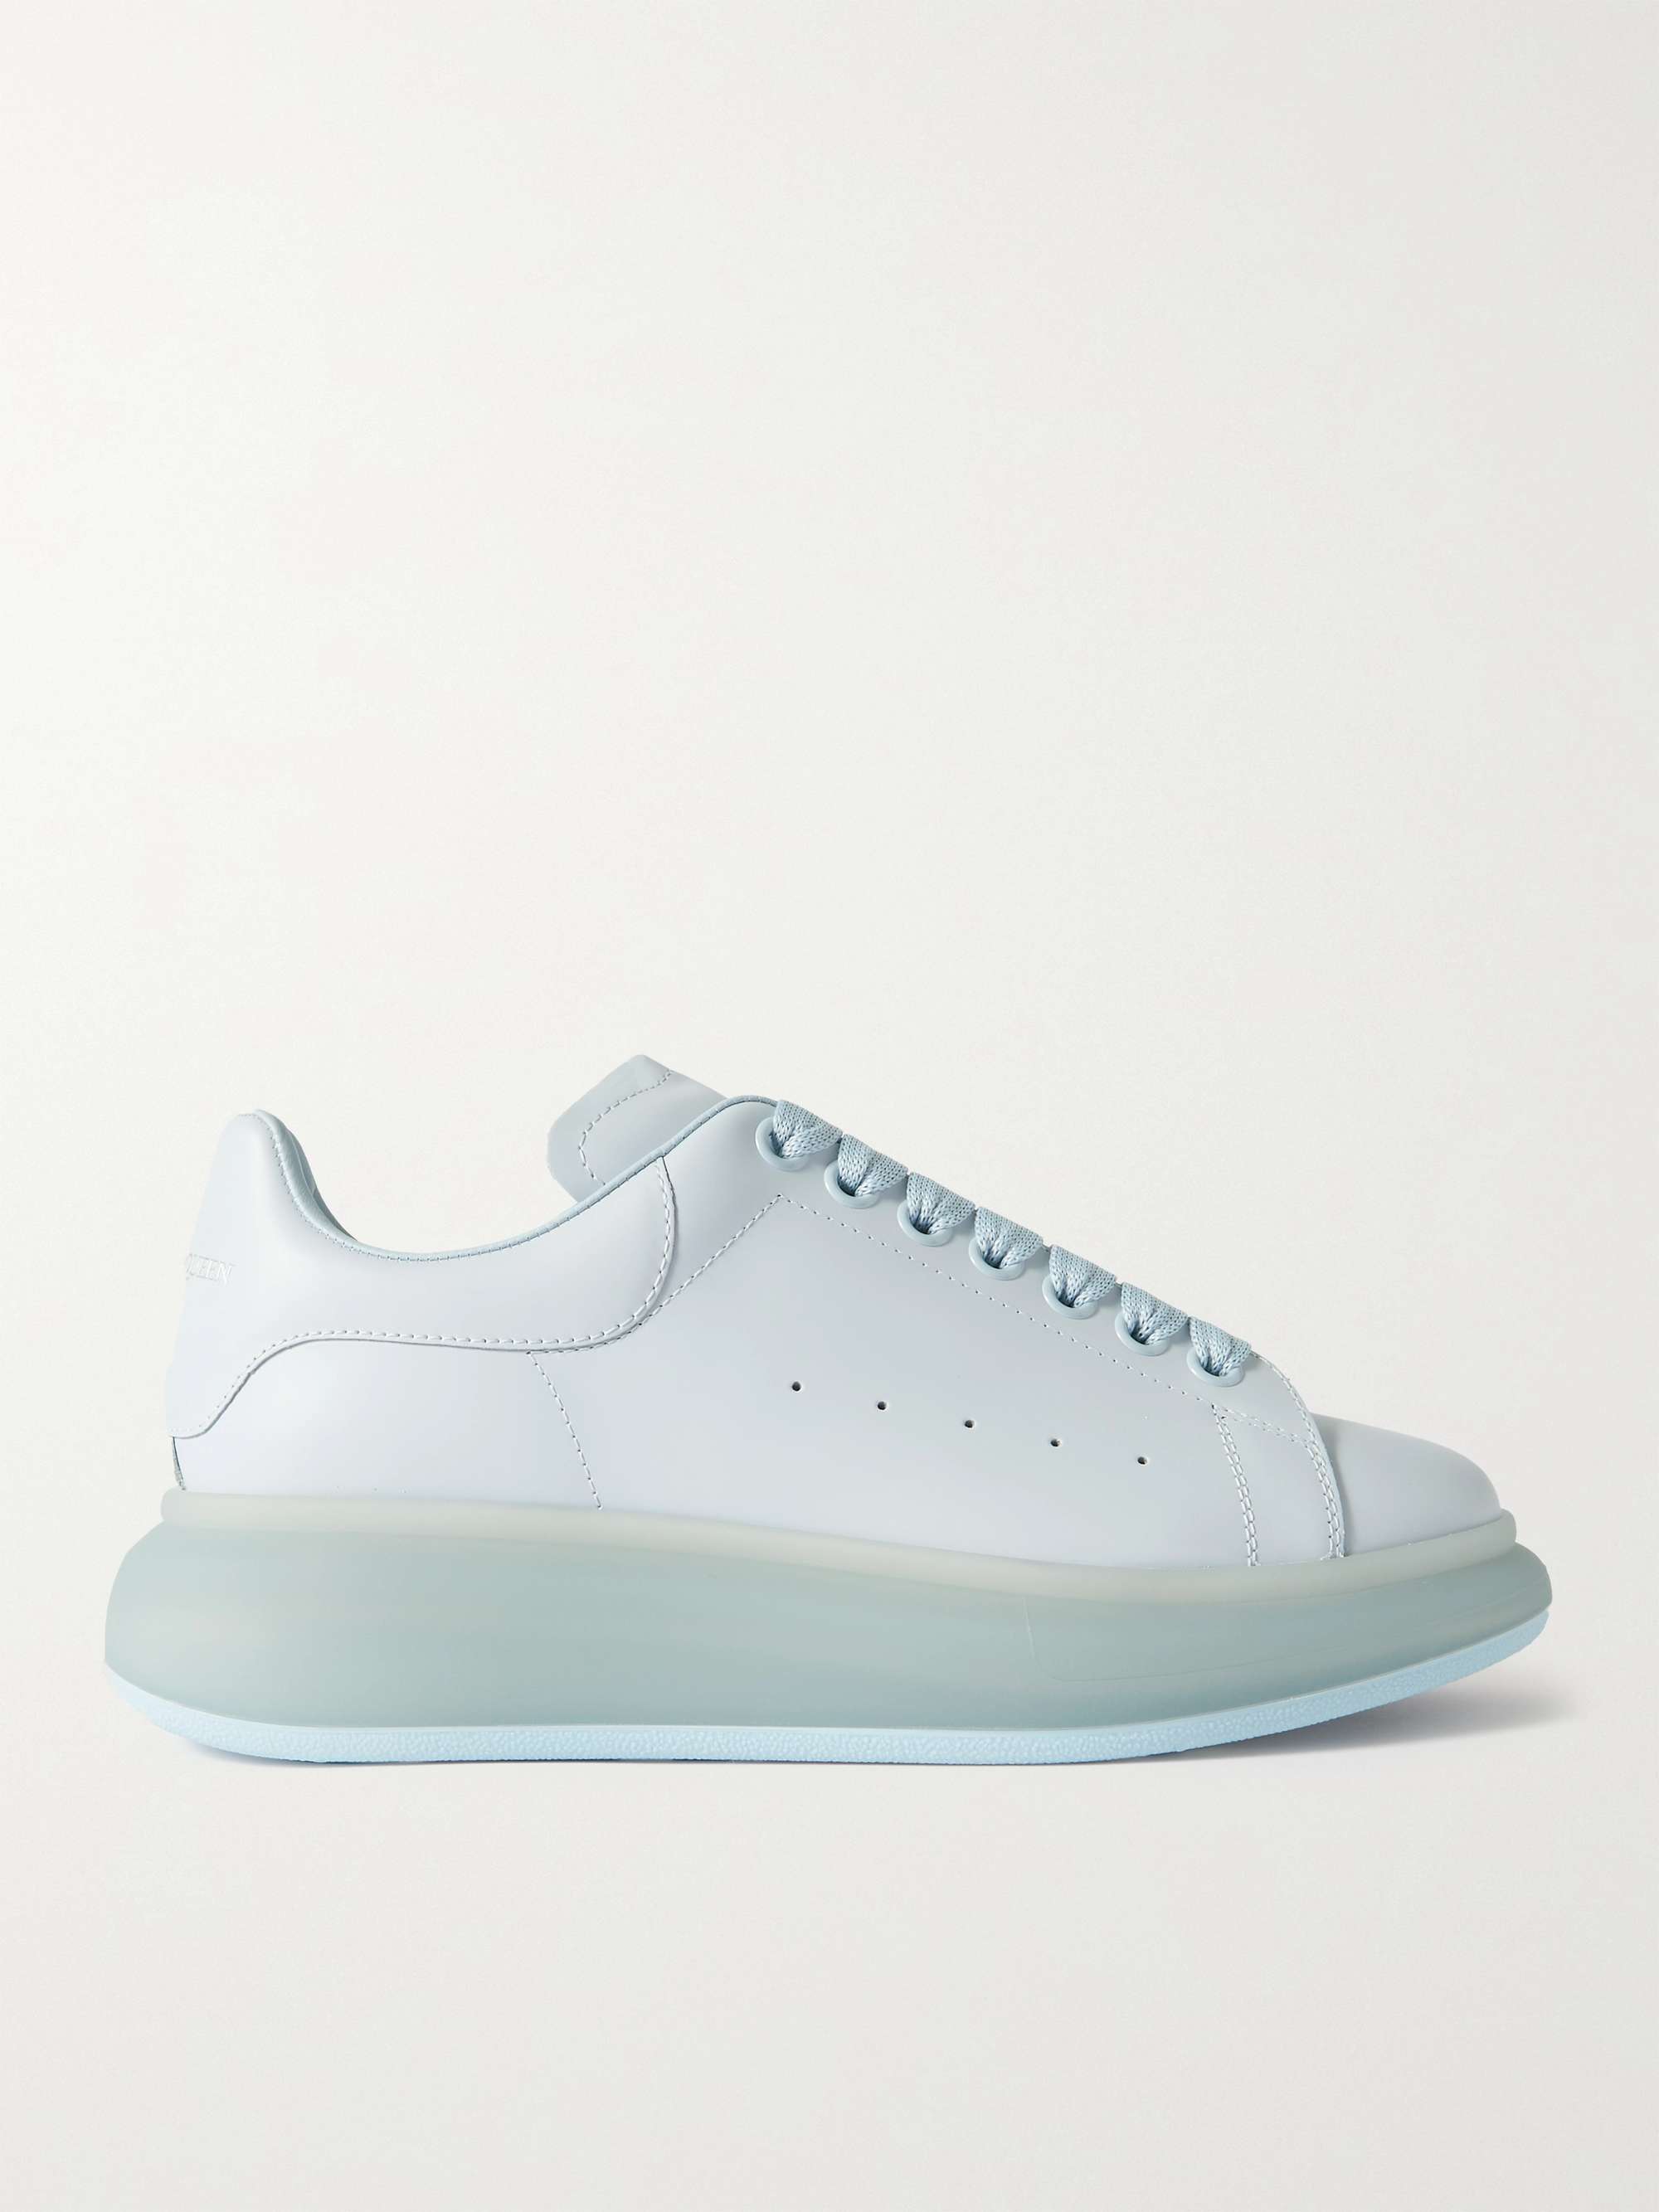 ALEXANDER MCQUEEN Exaggerated-Sole Leather Sneakers for Men | MR PORTER